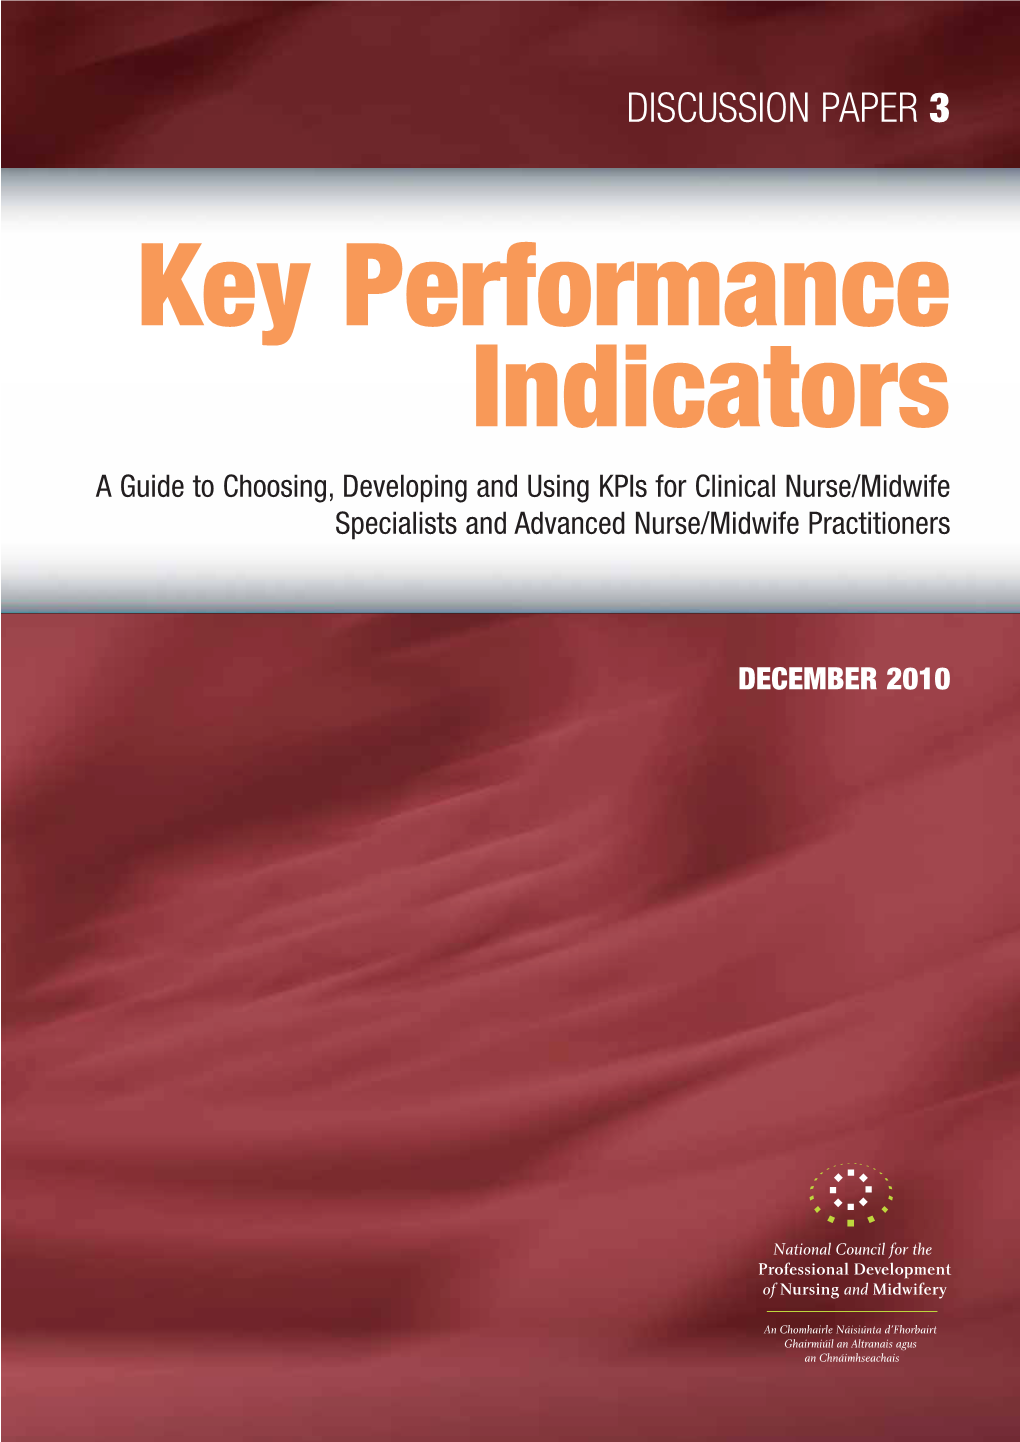 Key Performance Indicators a Guide to Choosing, Developing and Using Kpis for Clinical Nurse/Midwife Specialists and Advanced Nurse/Midwife Practitioners